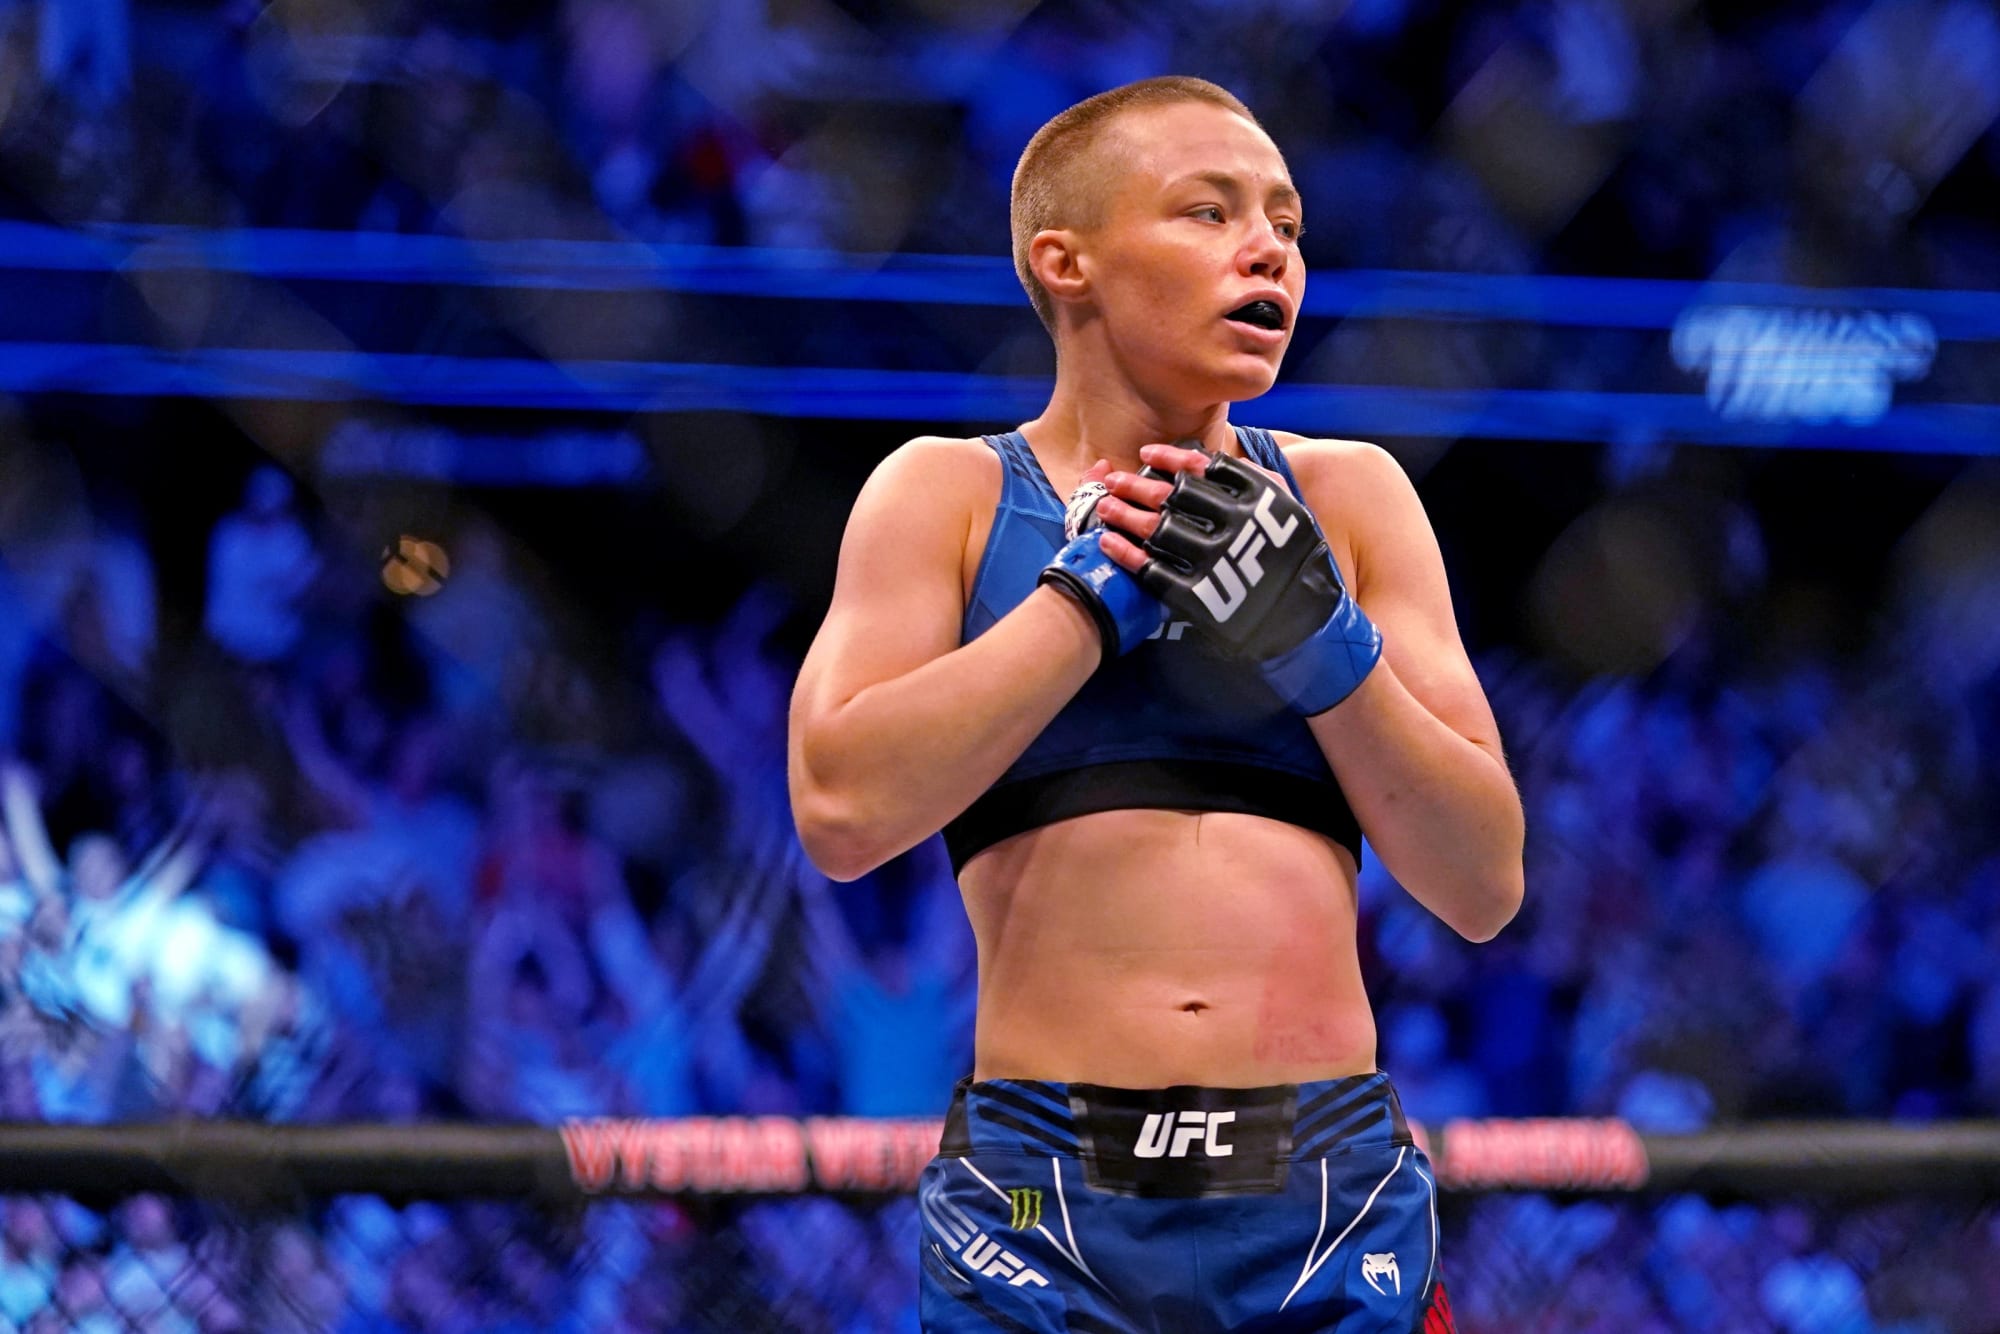 Rose Namajunas vs. Weili Zhang 2 preview and prediction Pedfire